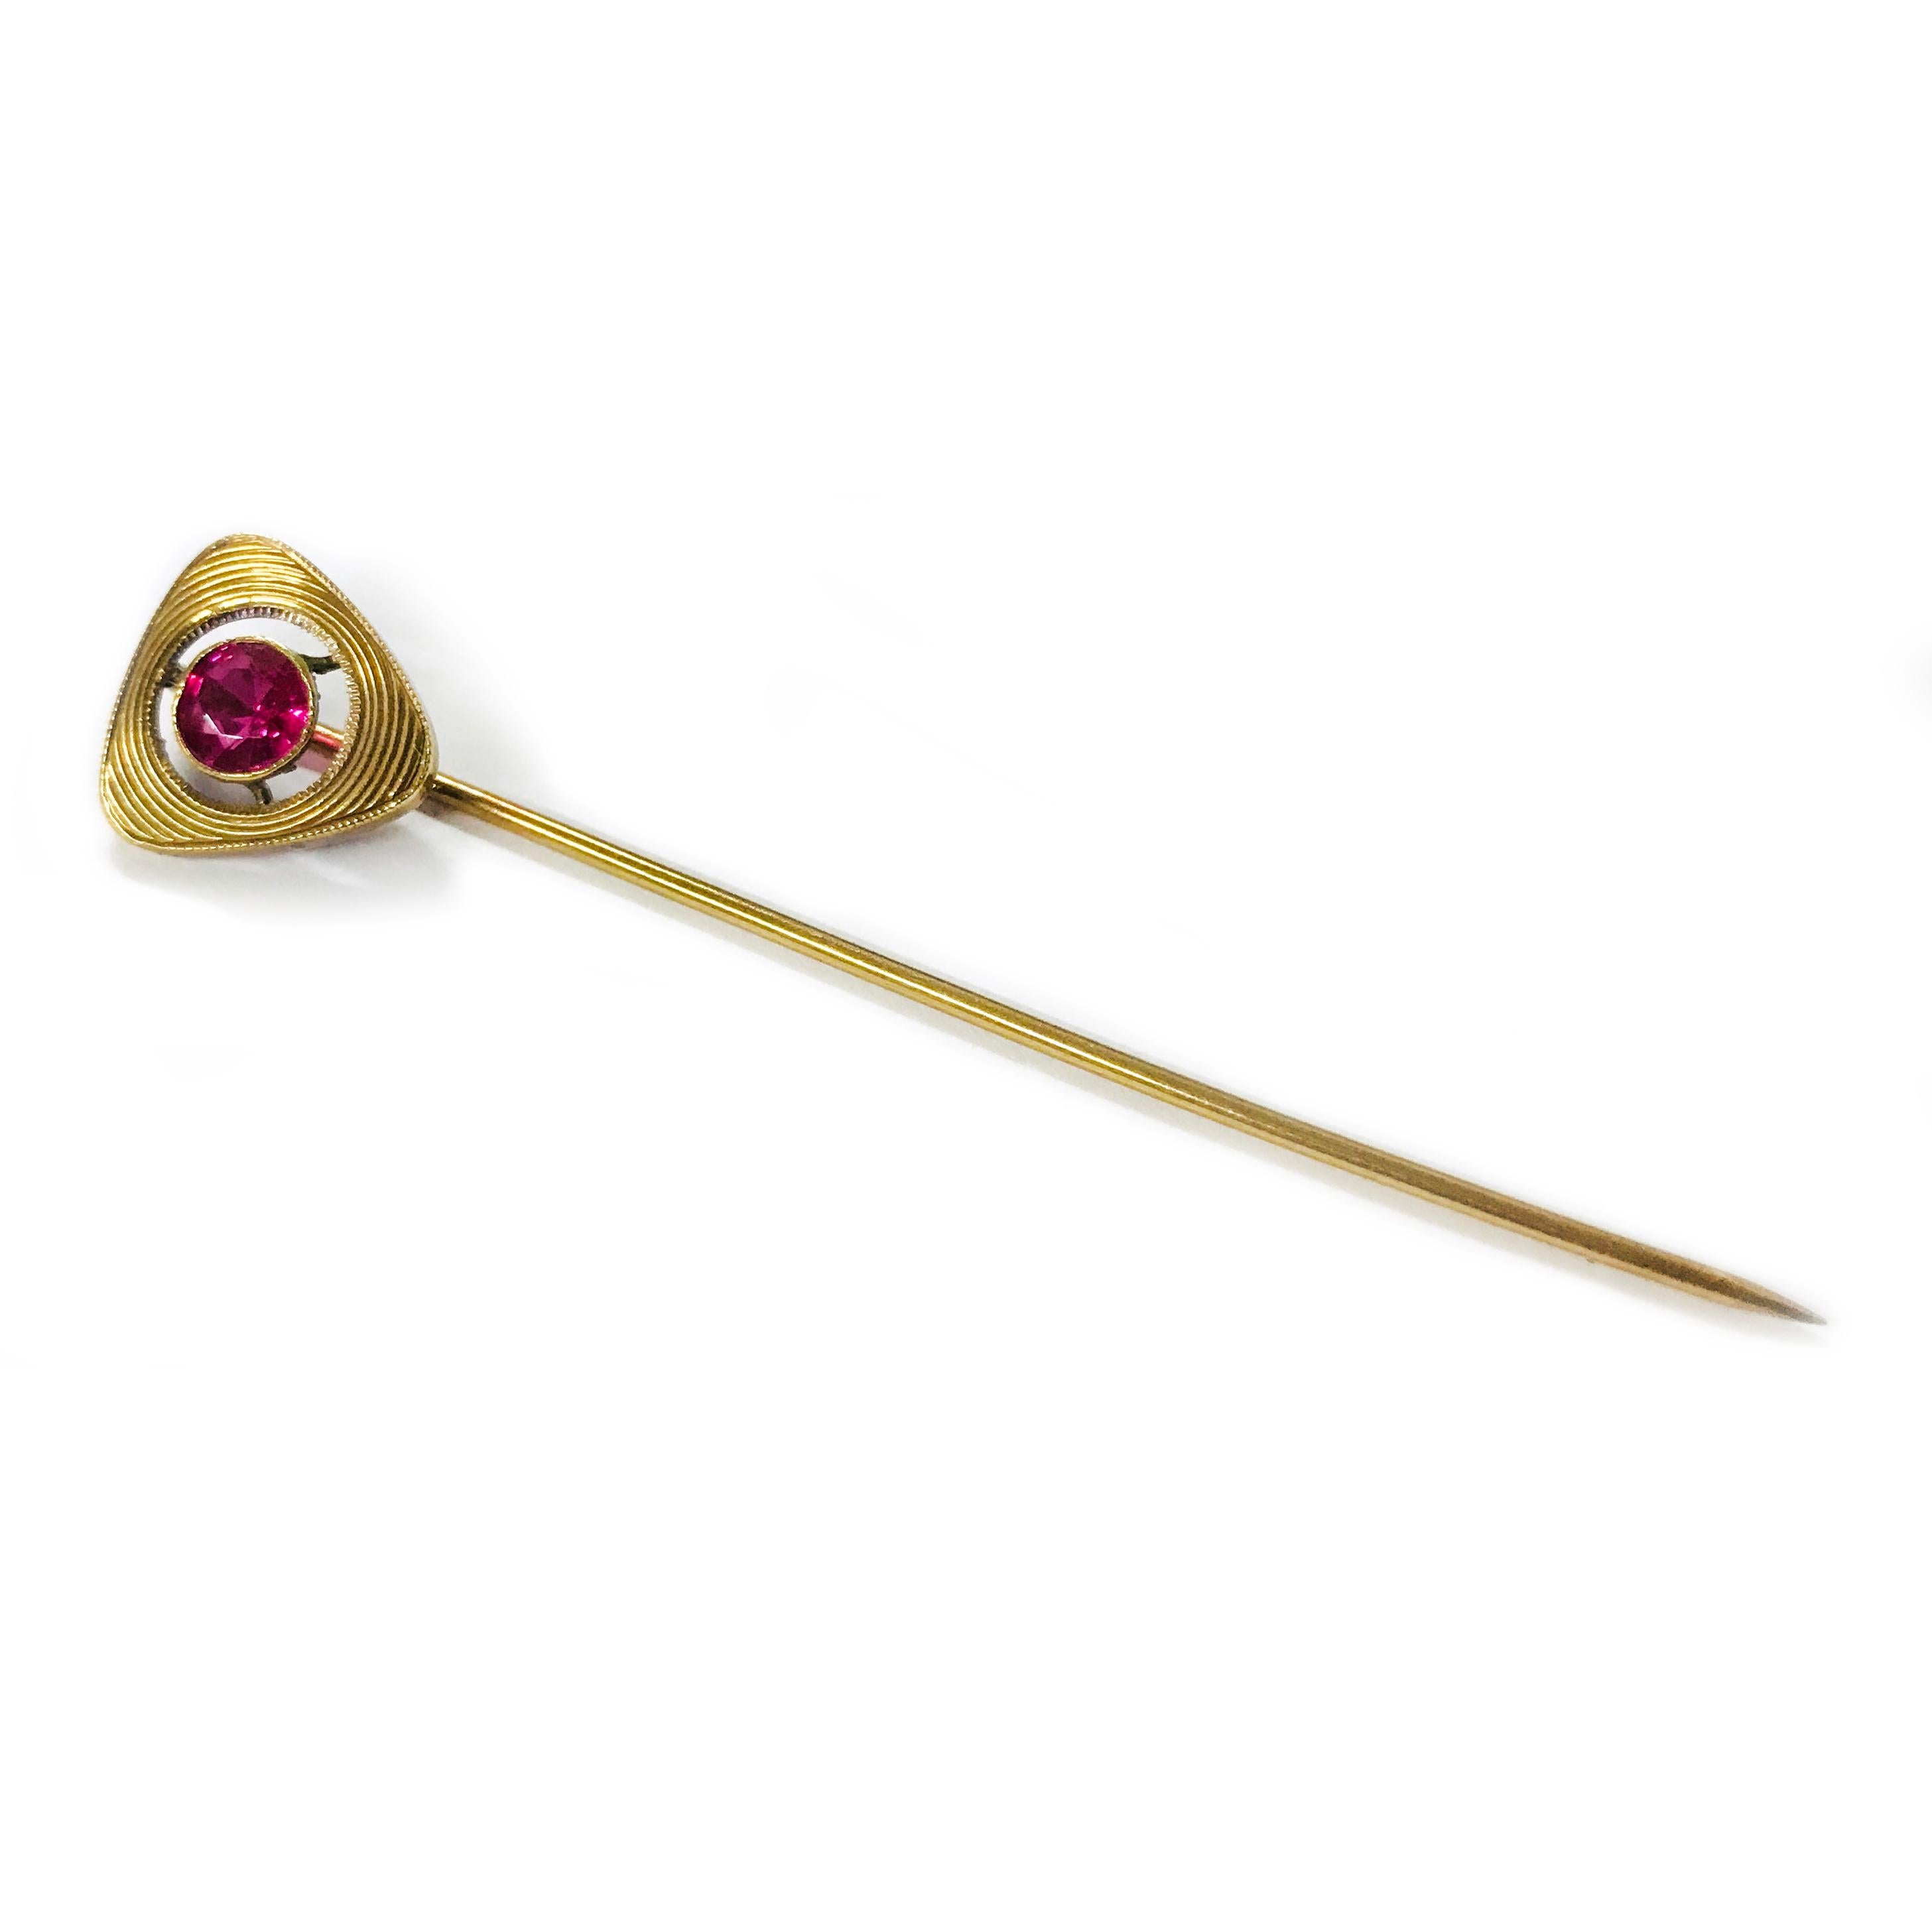 14 Karat Antique Ruby Hat Pin. A single round 5mm Ruby is bezel-set in the center of this triangle-shaped hat pin. The Ruby has a clean-eye with natural inclusions and has a total carat weight of 0.65ct. A simple yet elegant piece of antique